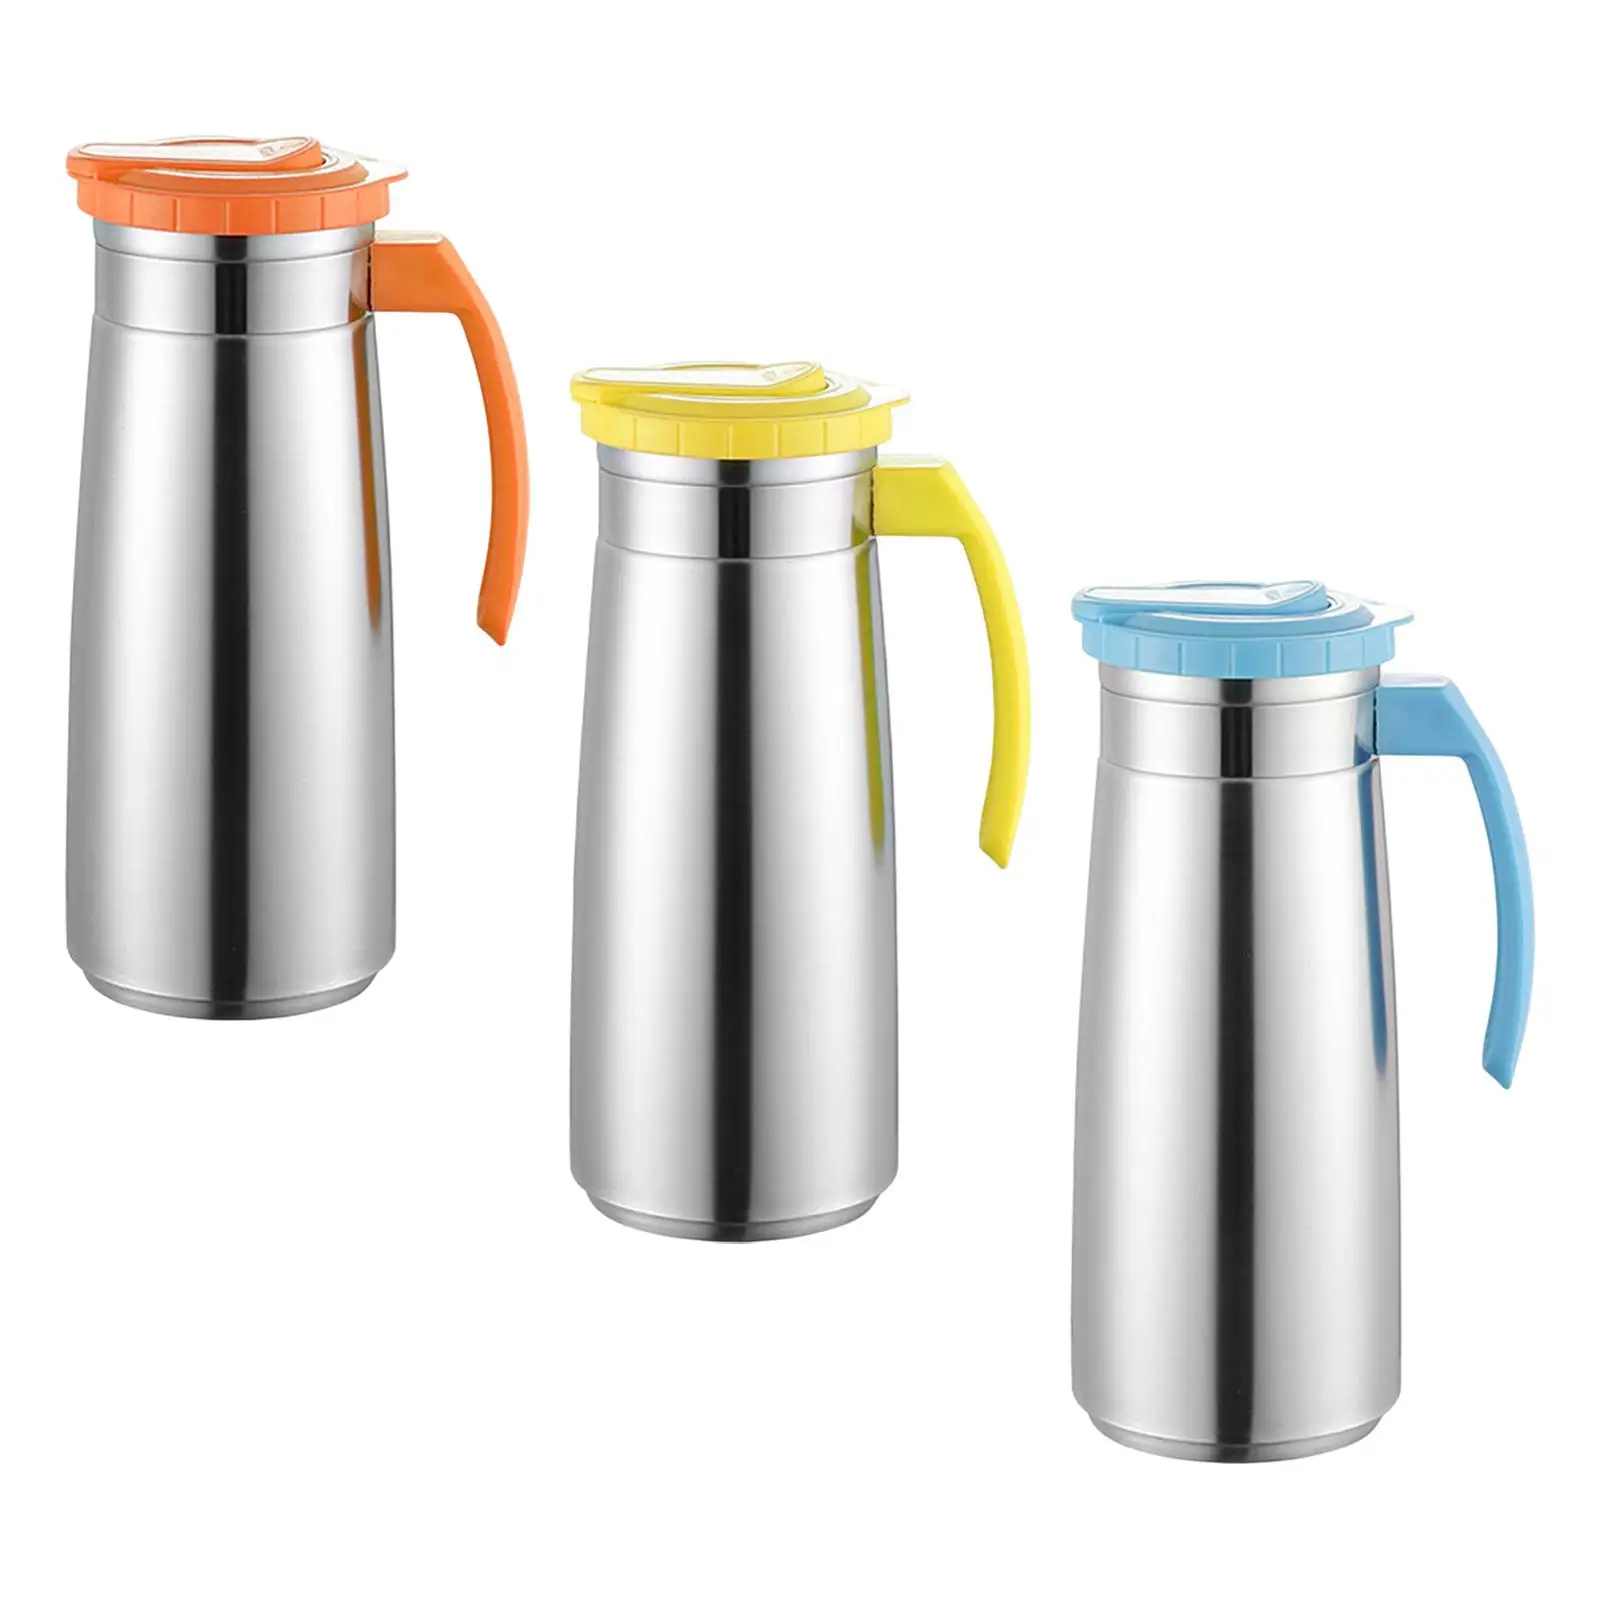 Stainless Steel Jug Sealed Lid Carafes Leakproof Water Jug 1300ml Water Bottle for Household Kitchen Fridge Picnic Holiday